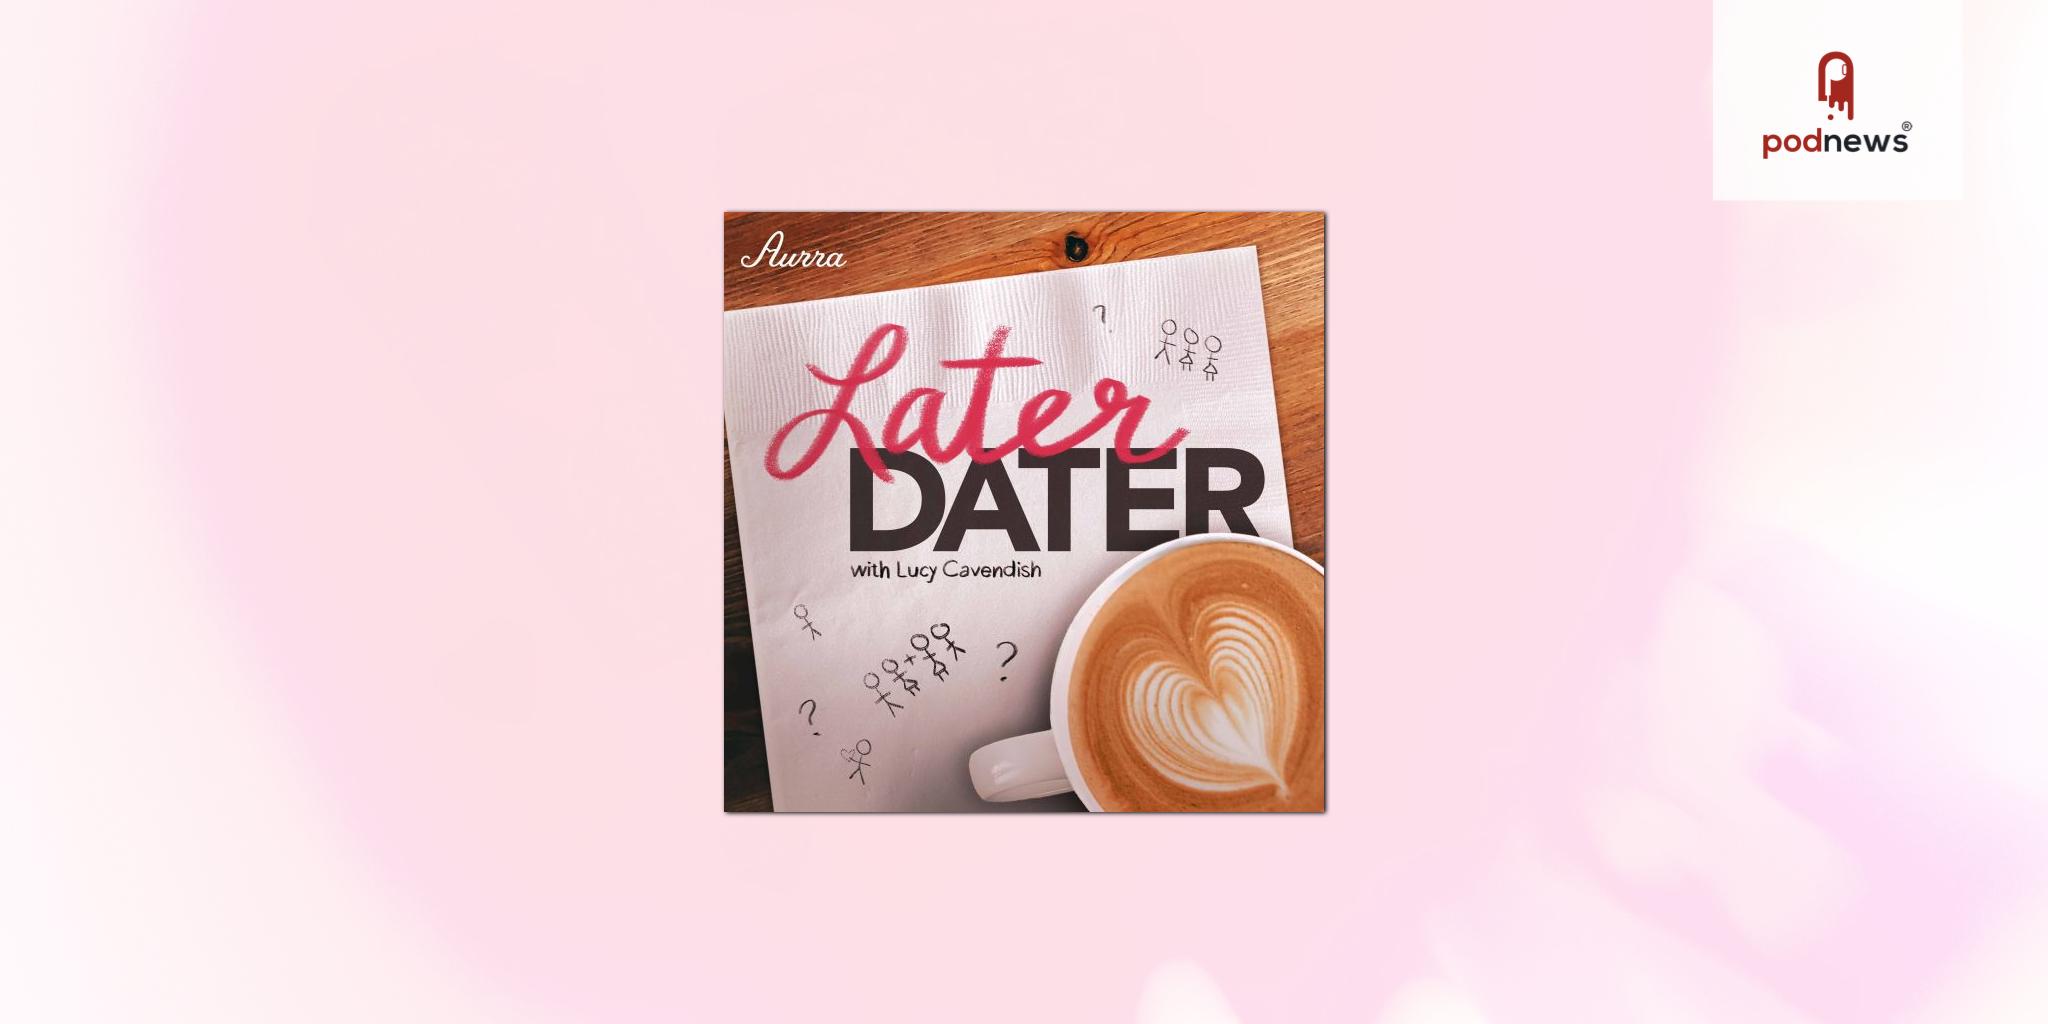 Later Dater love coach reveals all in intimate new podcast series